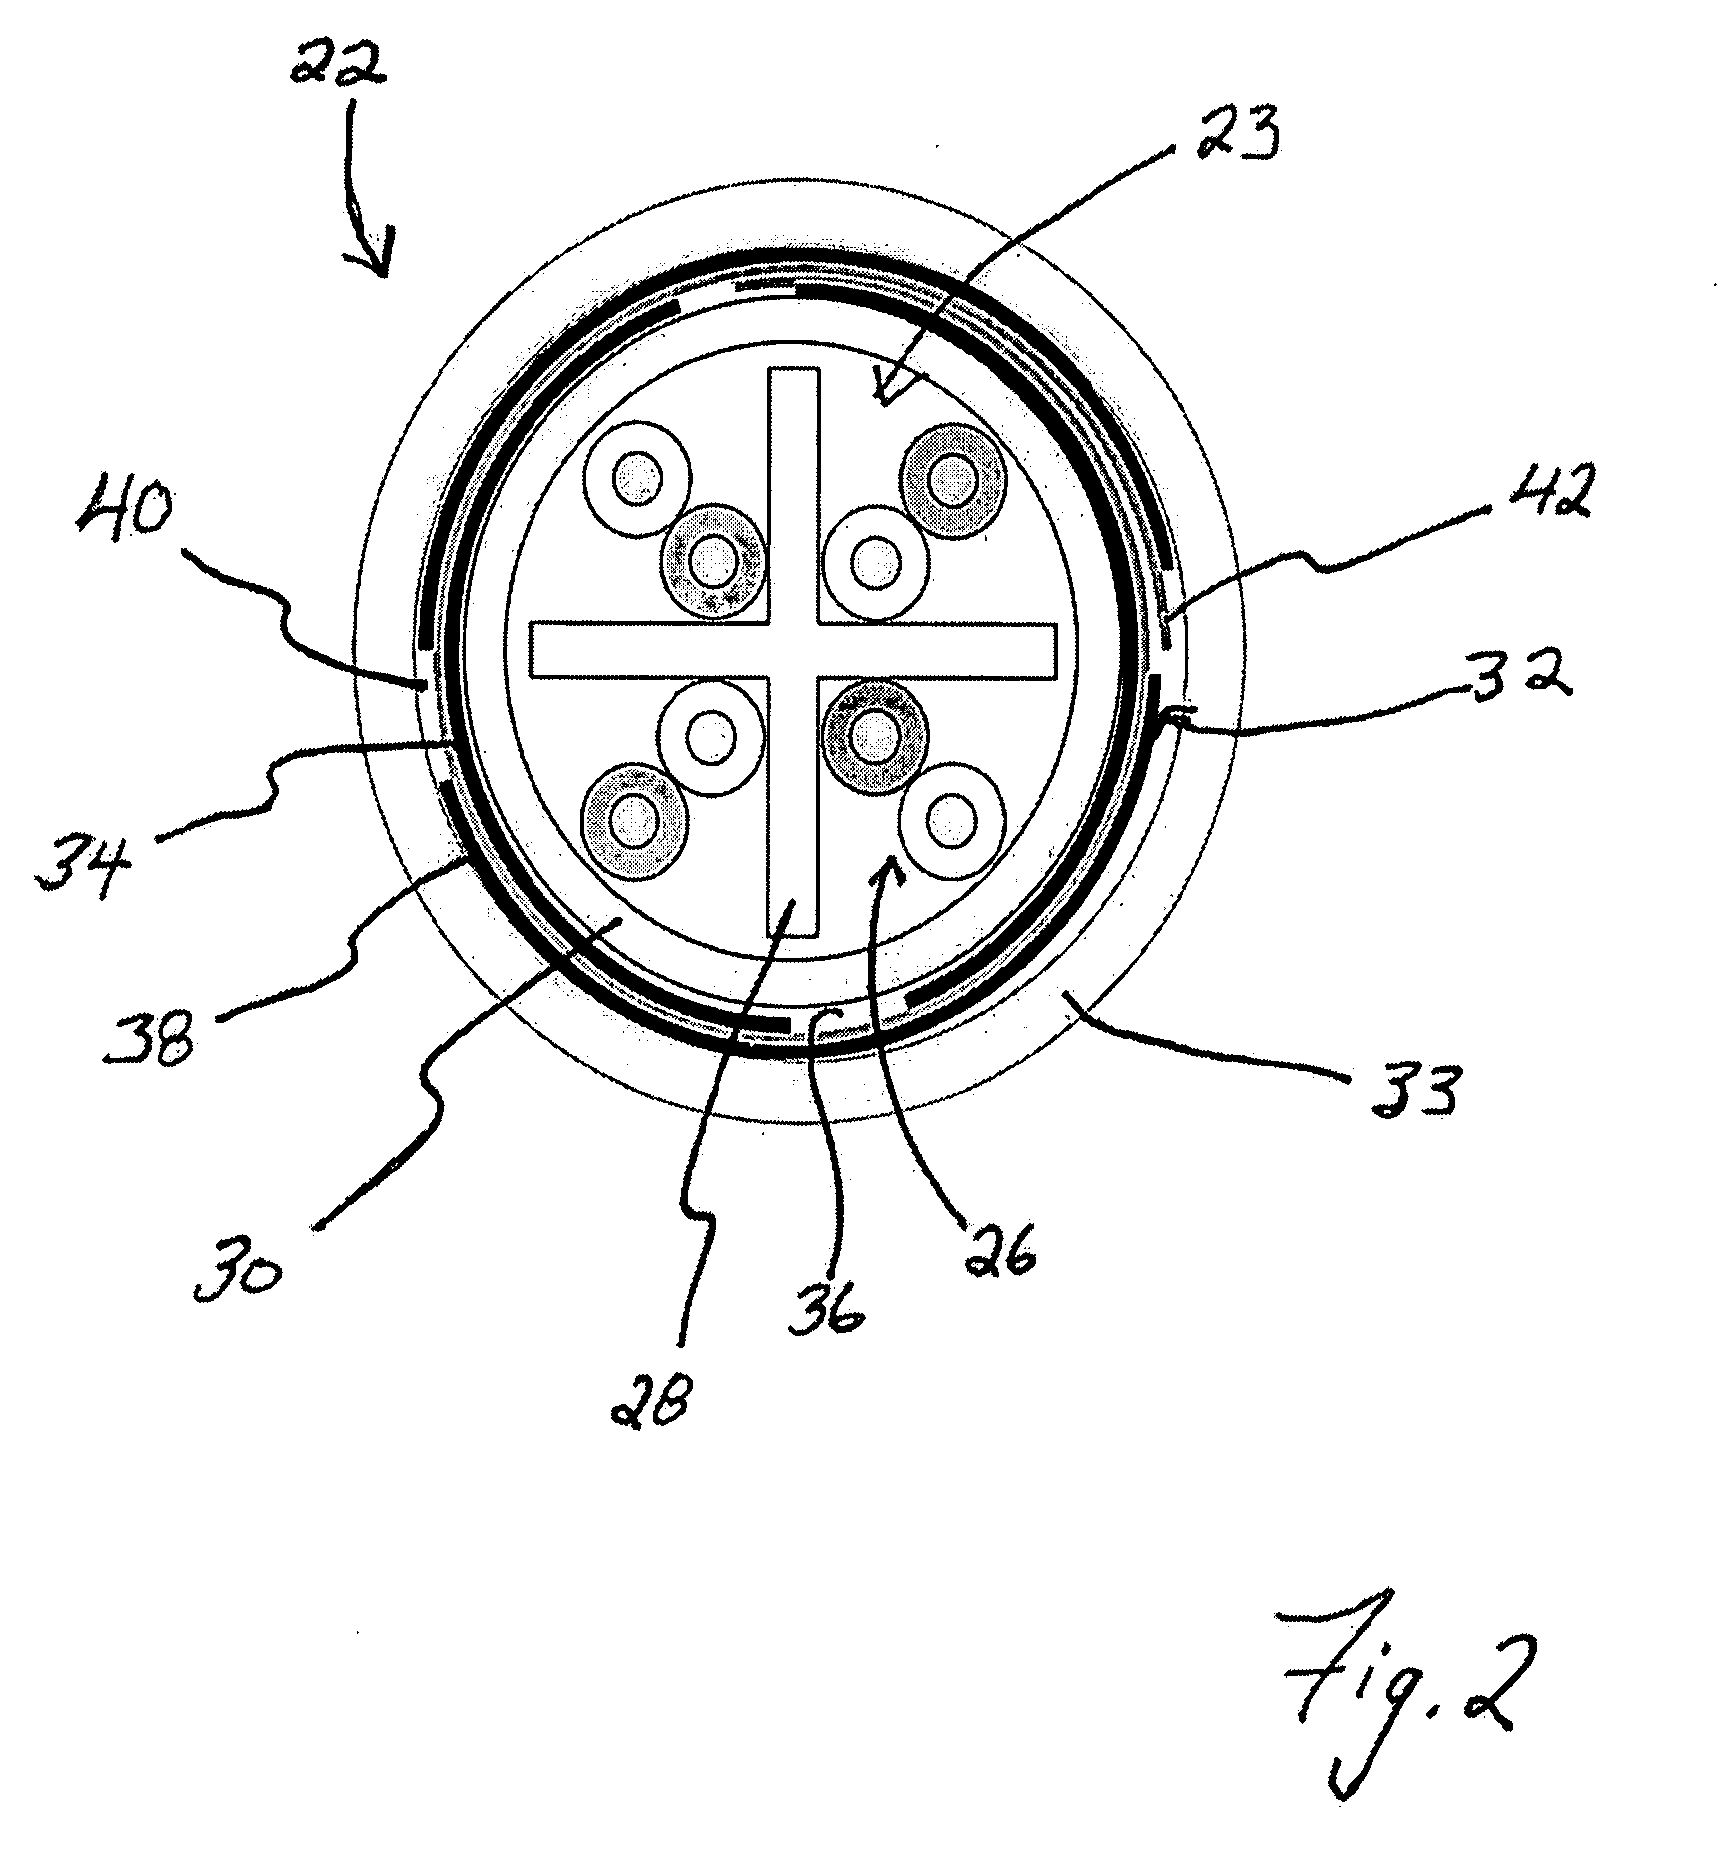 Communication Cable with Improved Crosstalk Attenuation